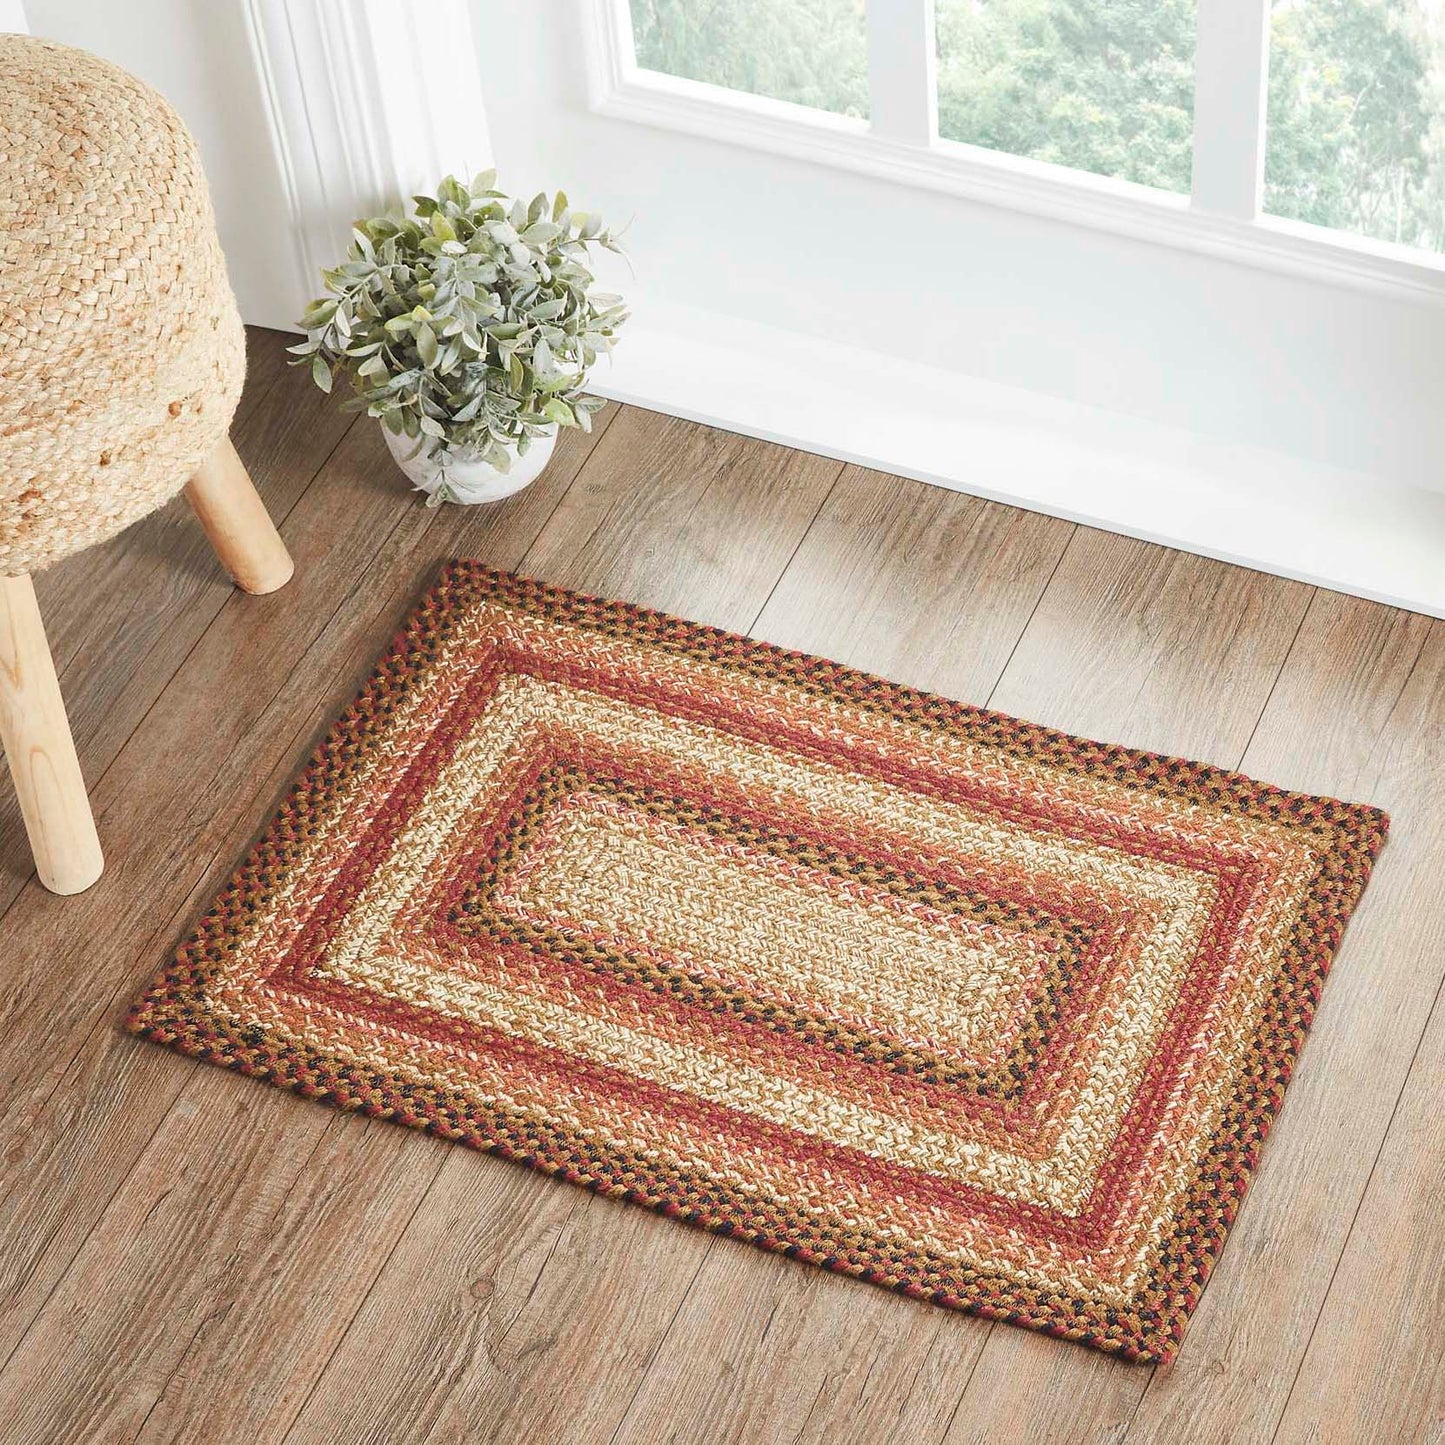 67117-Ginger-Spice-Jute-Rug-Rect-w-Pad-20x30-image-1